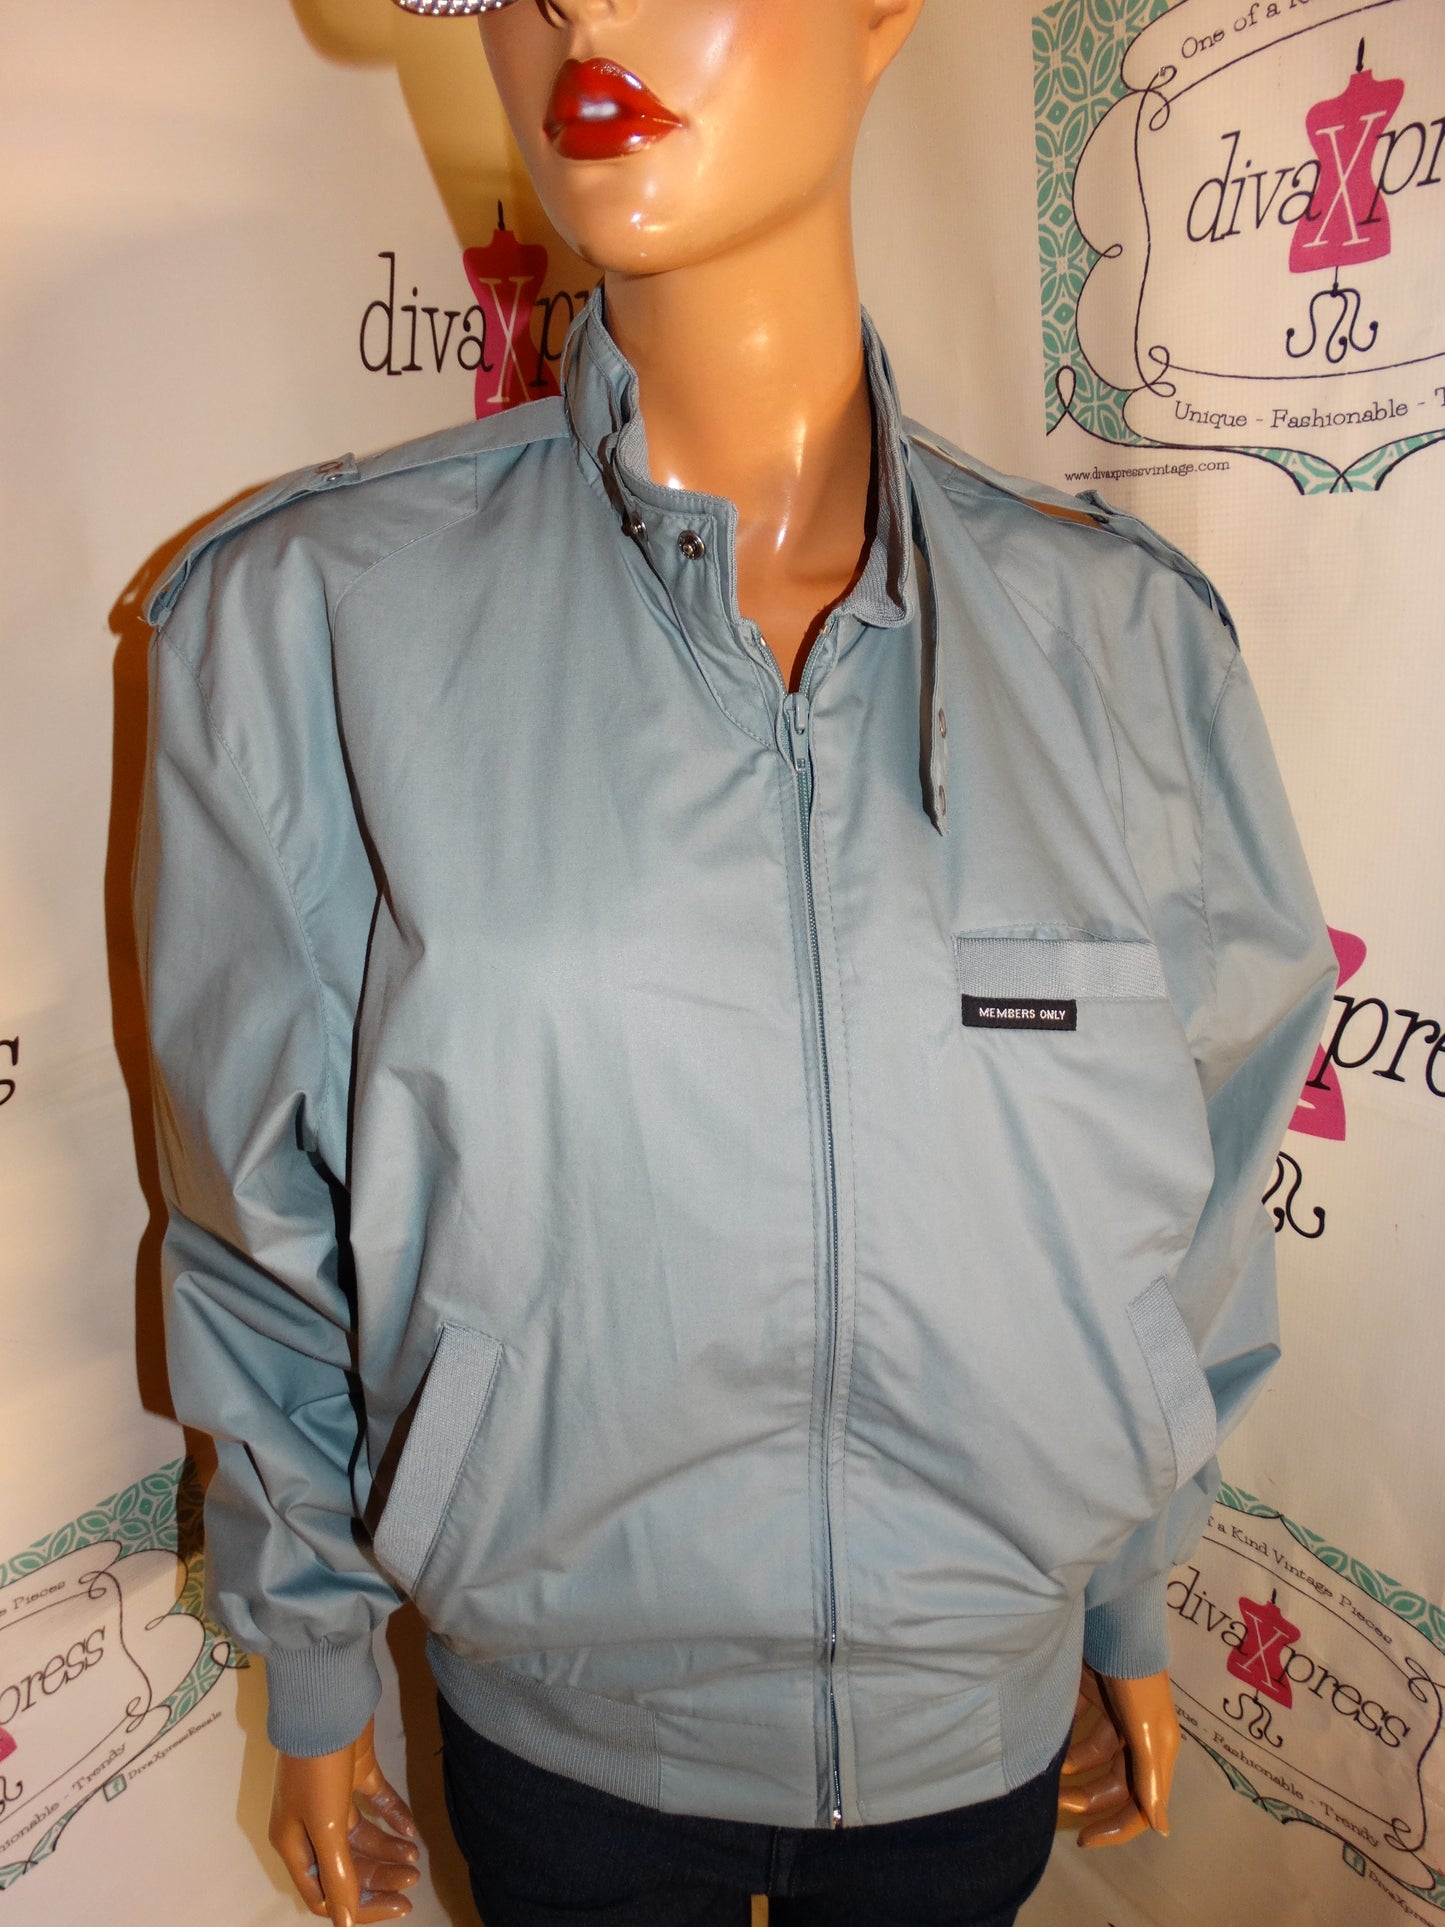 Vintage Members Only Blue Jacket Size M